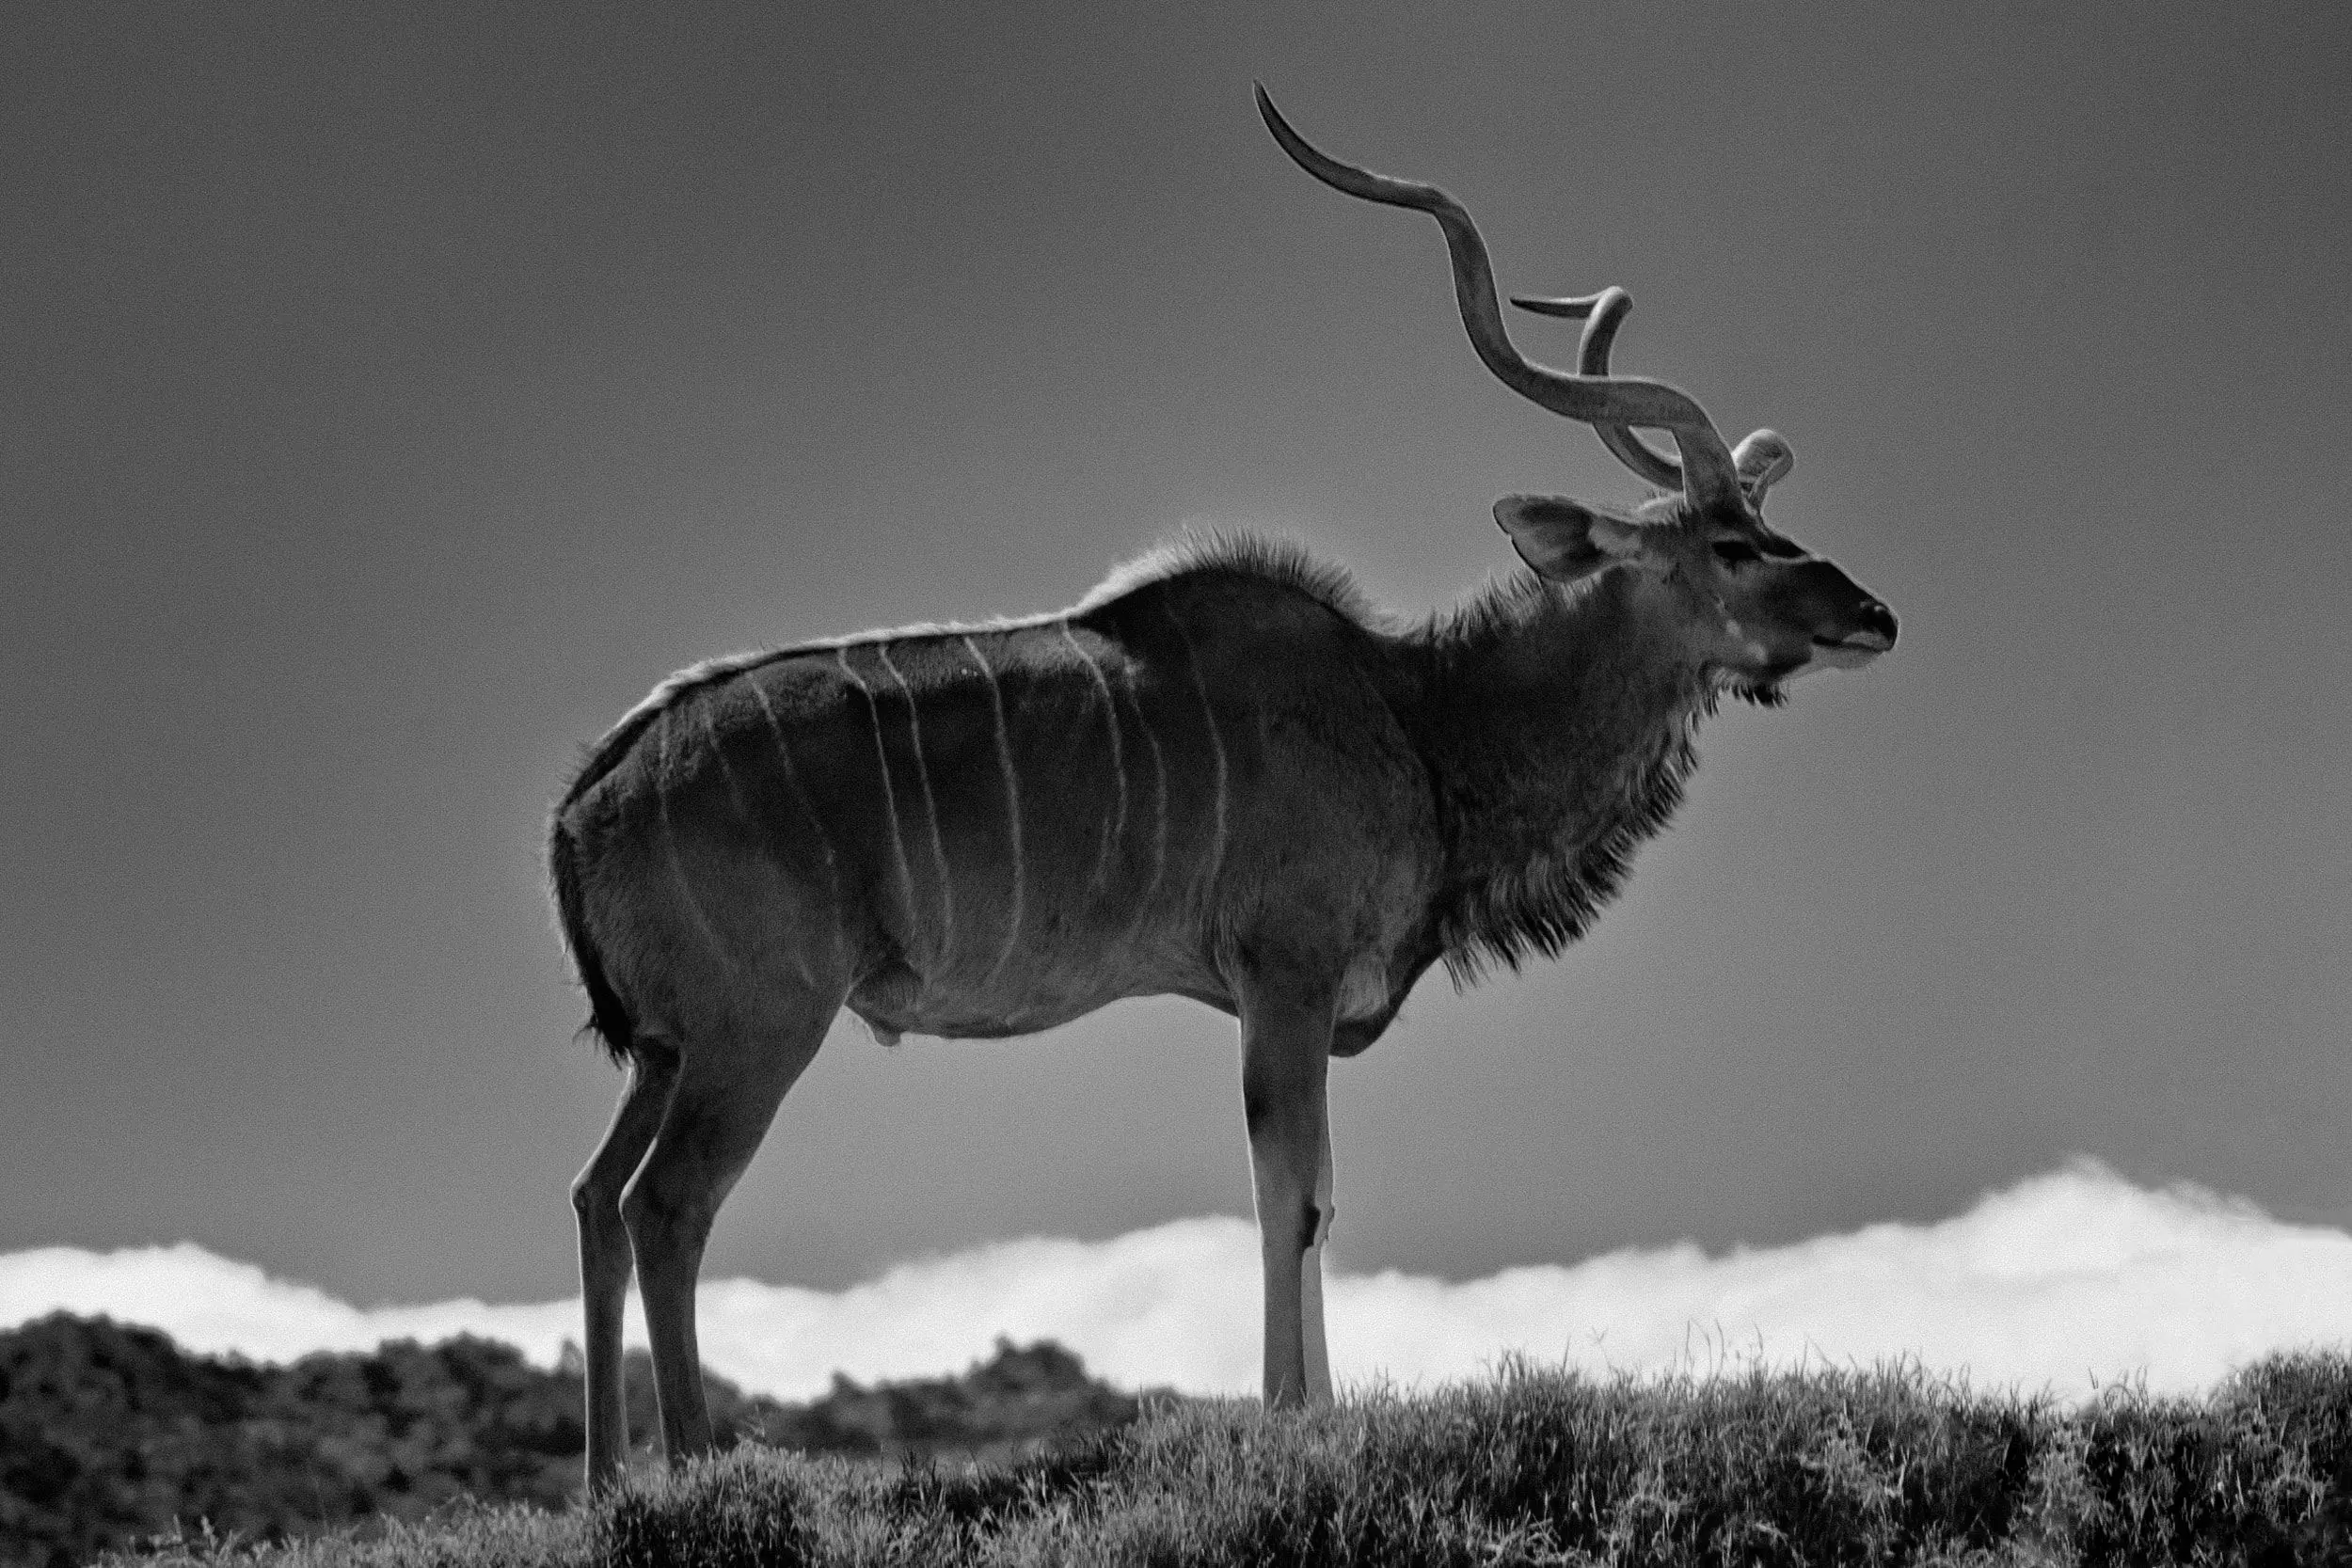 A kudu stands tall on grass in front of fluffy white clouds. Black and white.